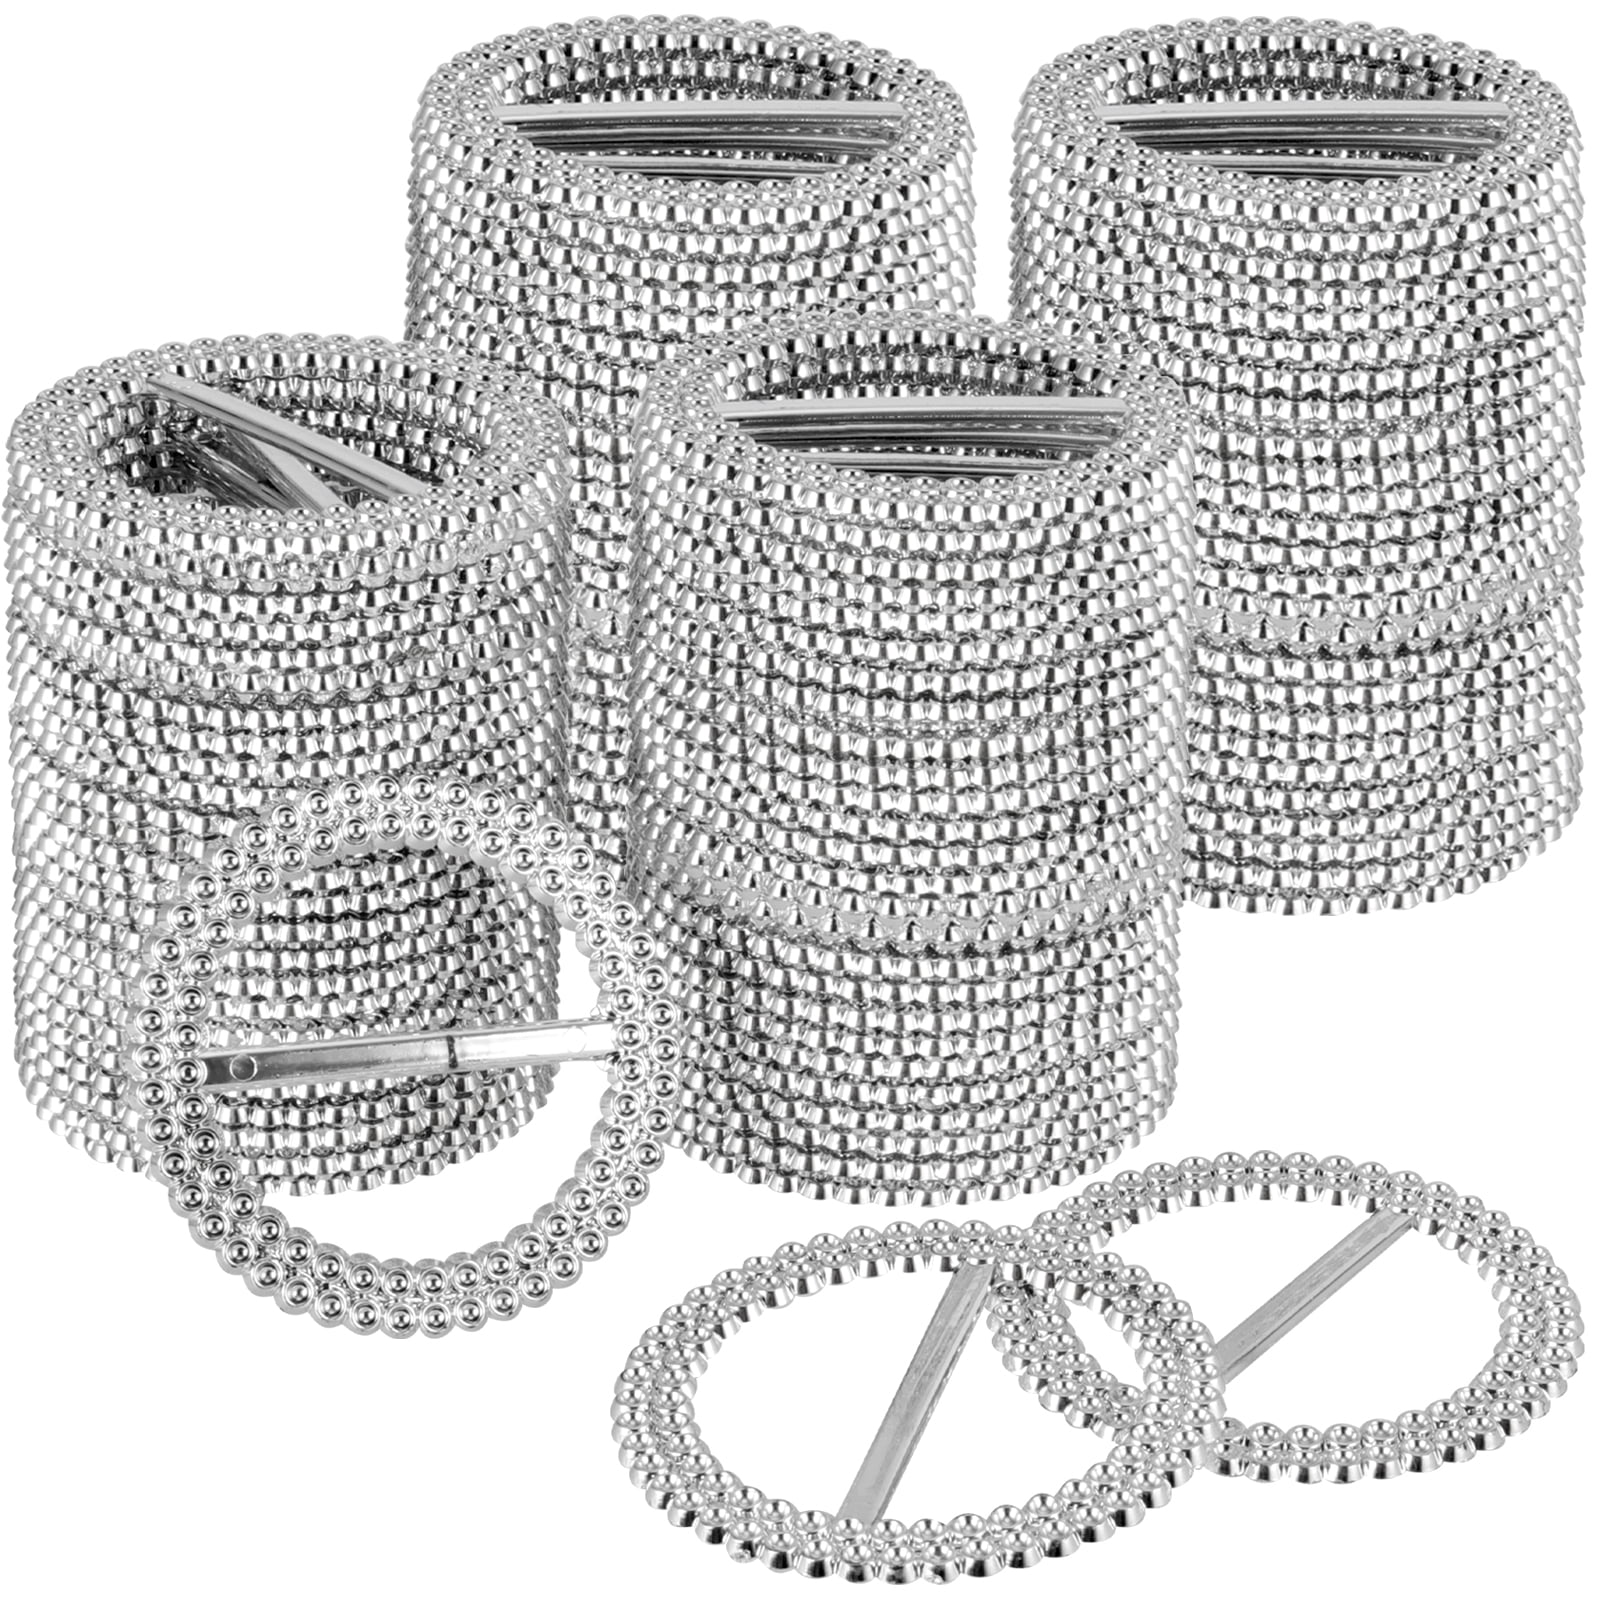 100Pcs Chair Sash Rings Silver Napkin Holder with Easy 100pcs, 